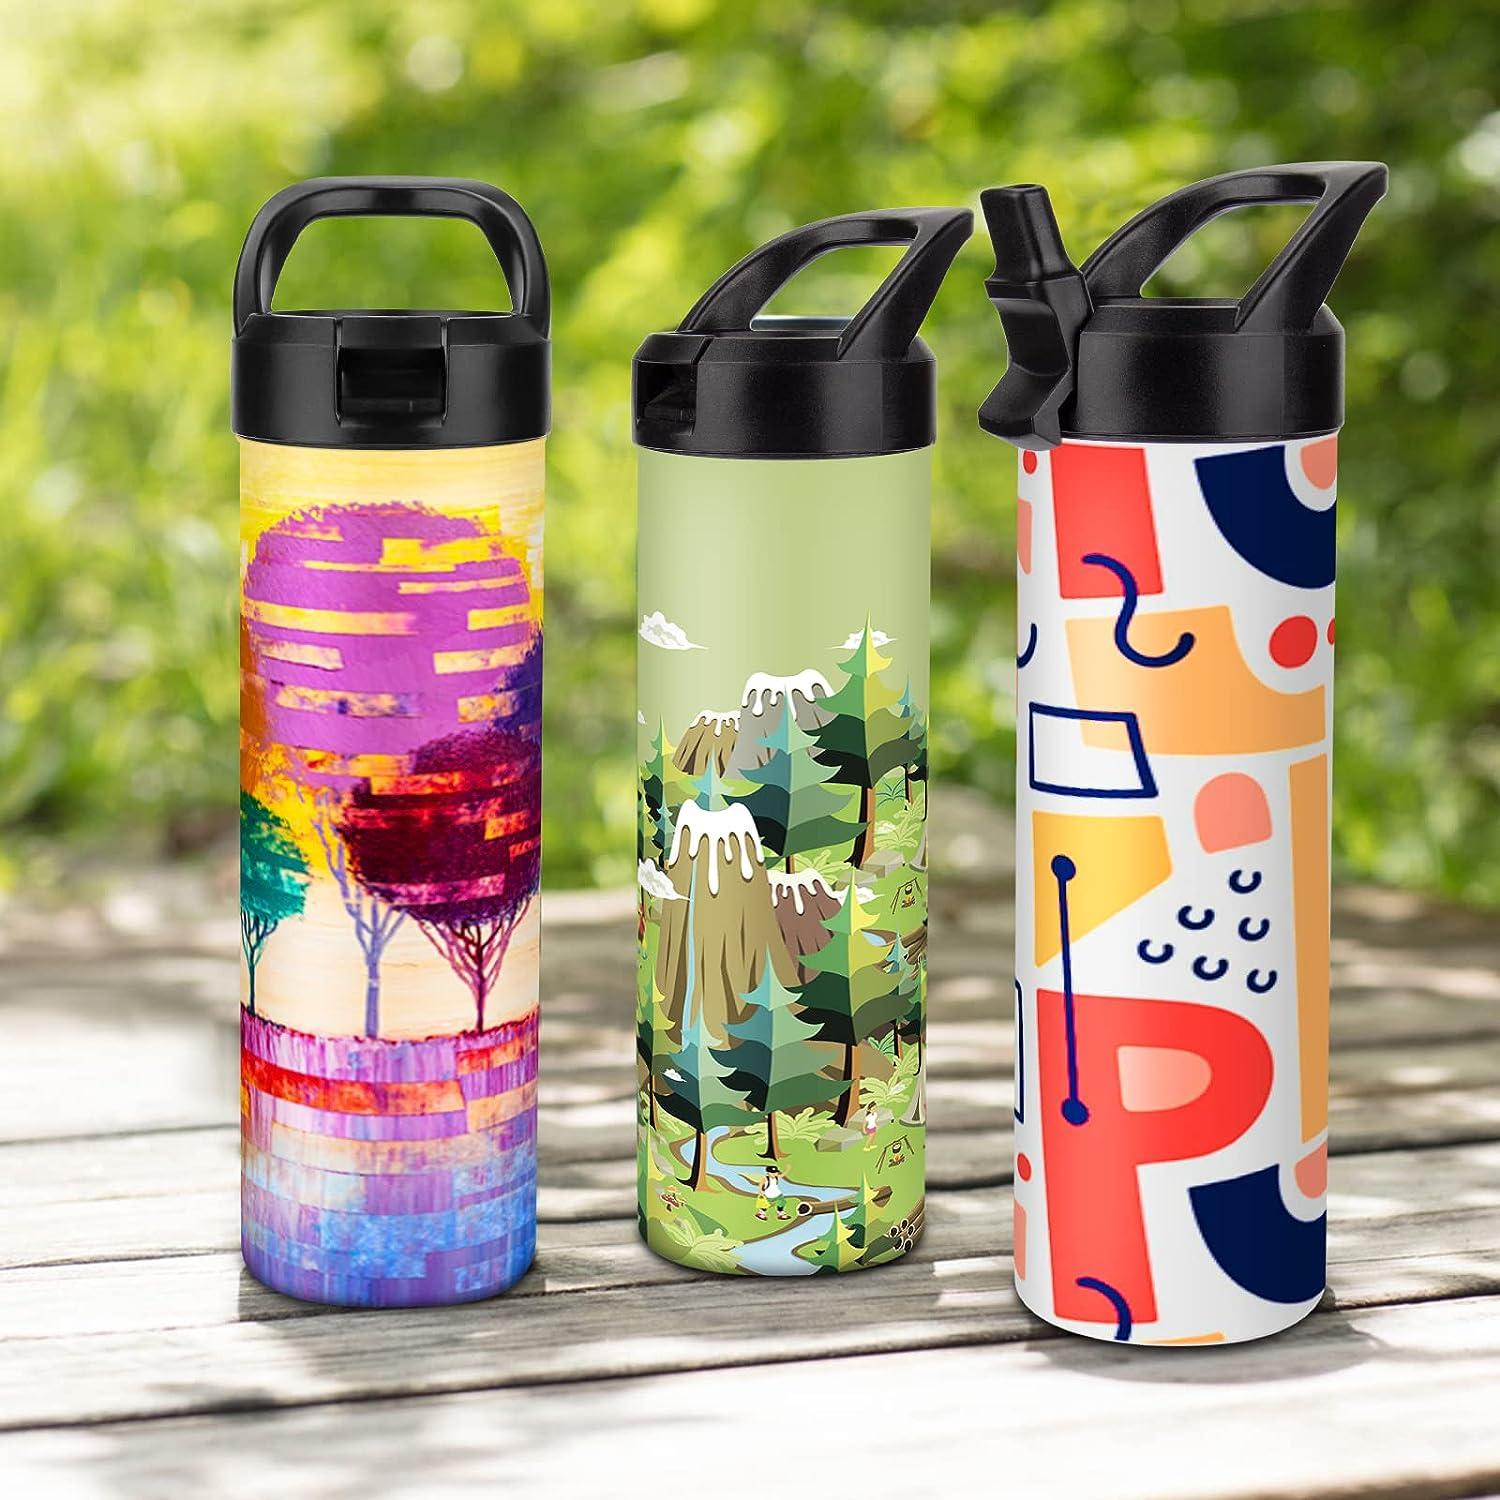 Bundle Sets of Insulated Bottles, Cups and Tumblers